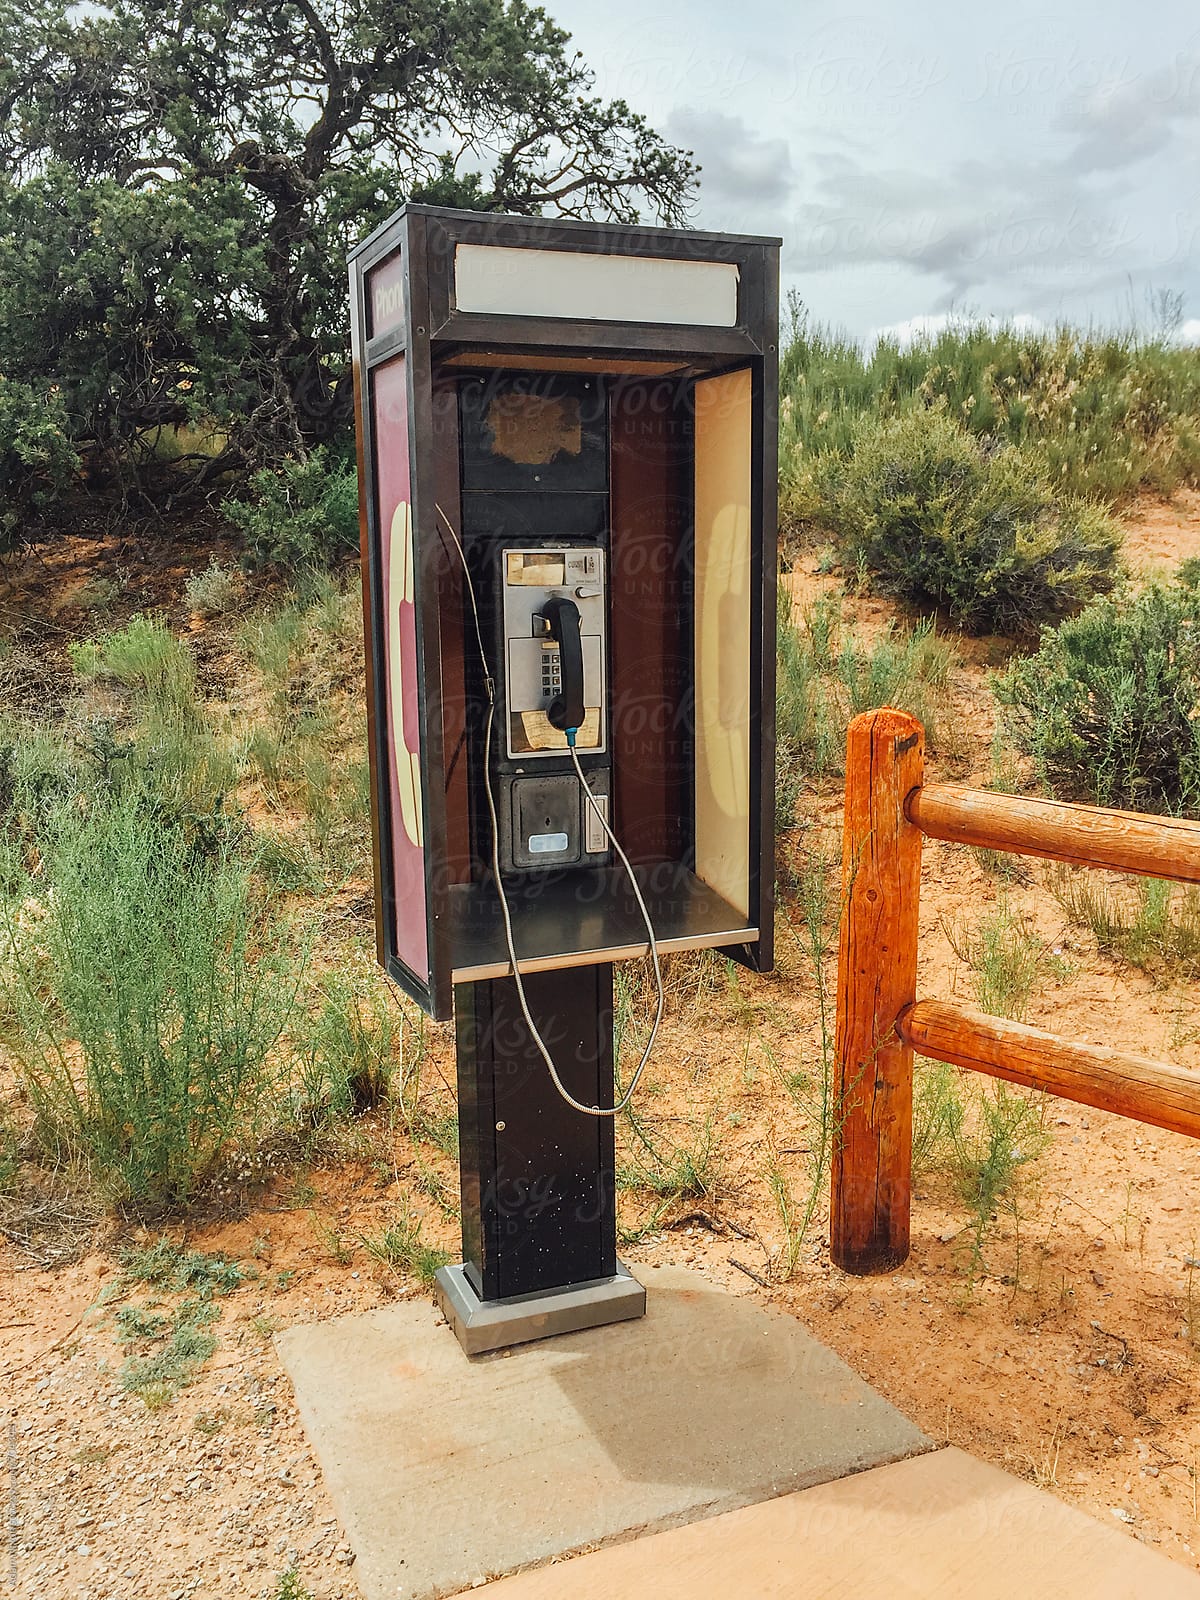 Old pay phone out in the desert